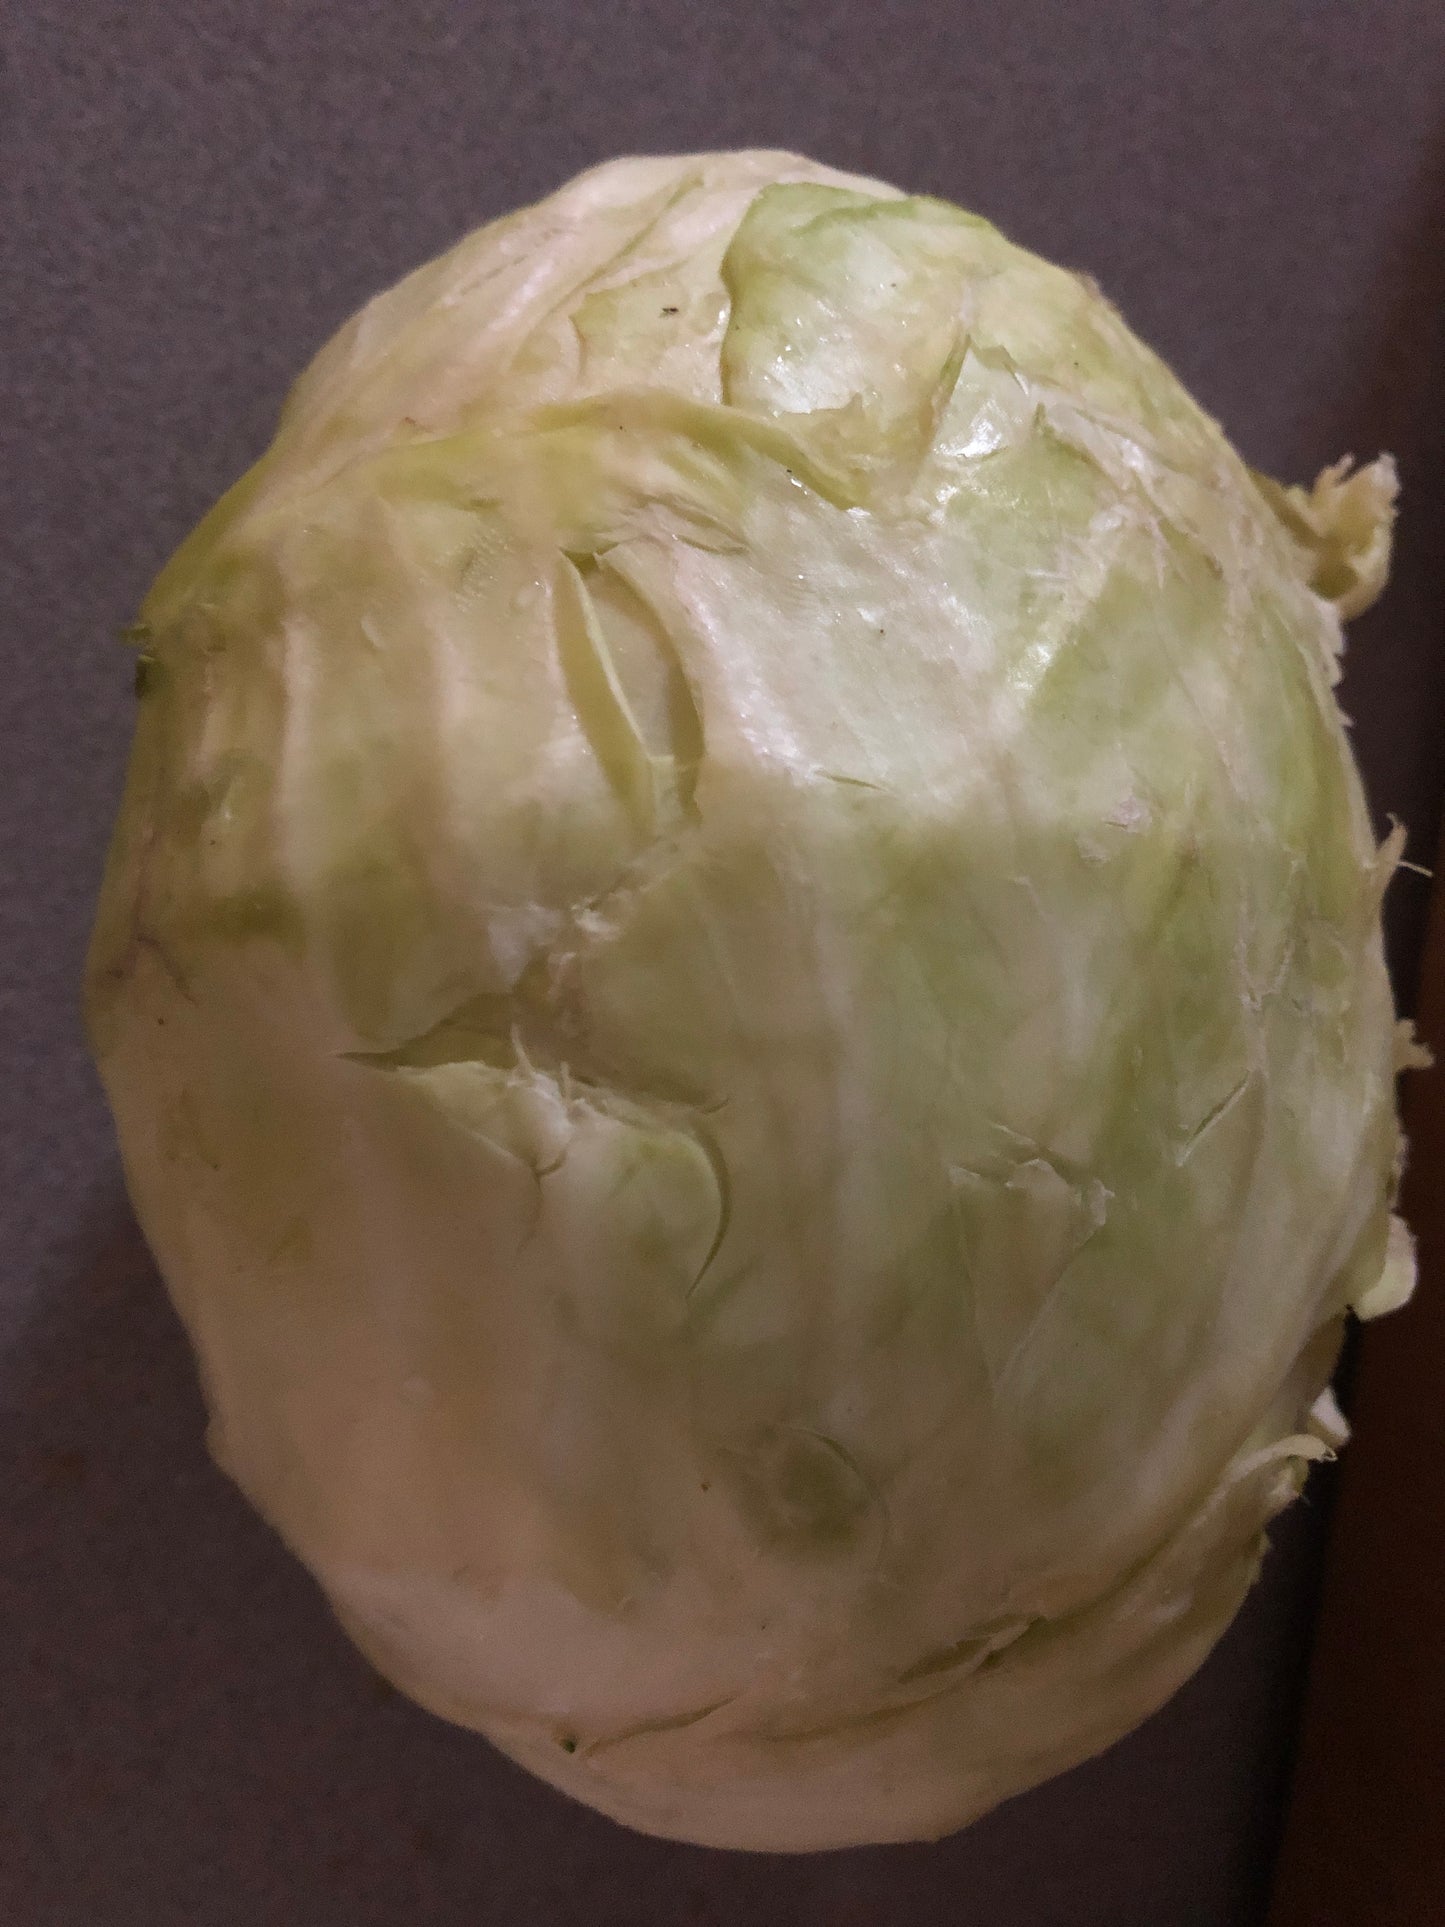 Cabbages - Variety